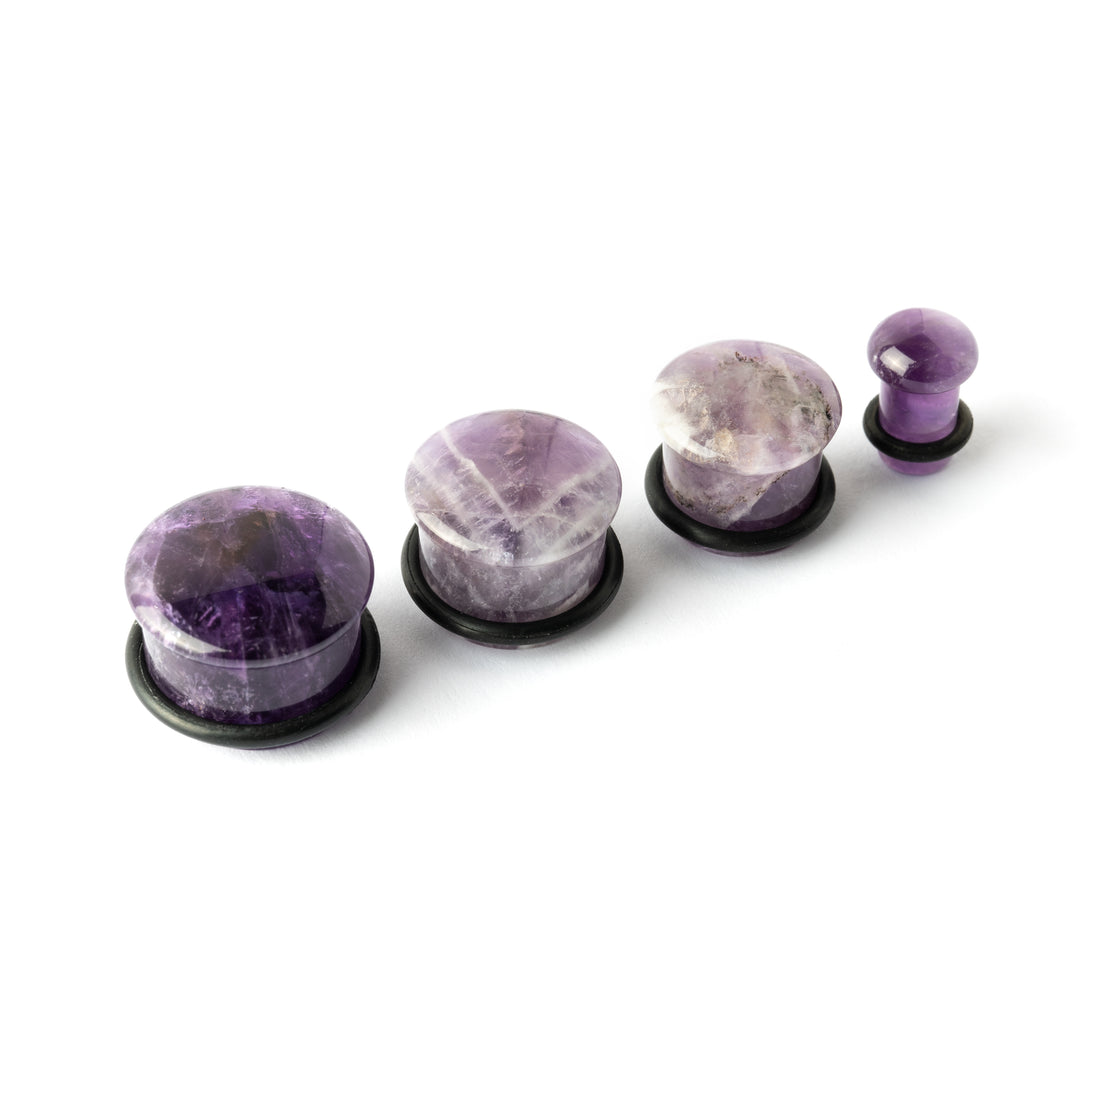 several sizes of Single Flare Amethyst stone ear plugs front view